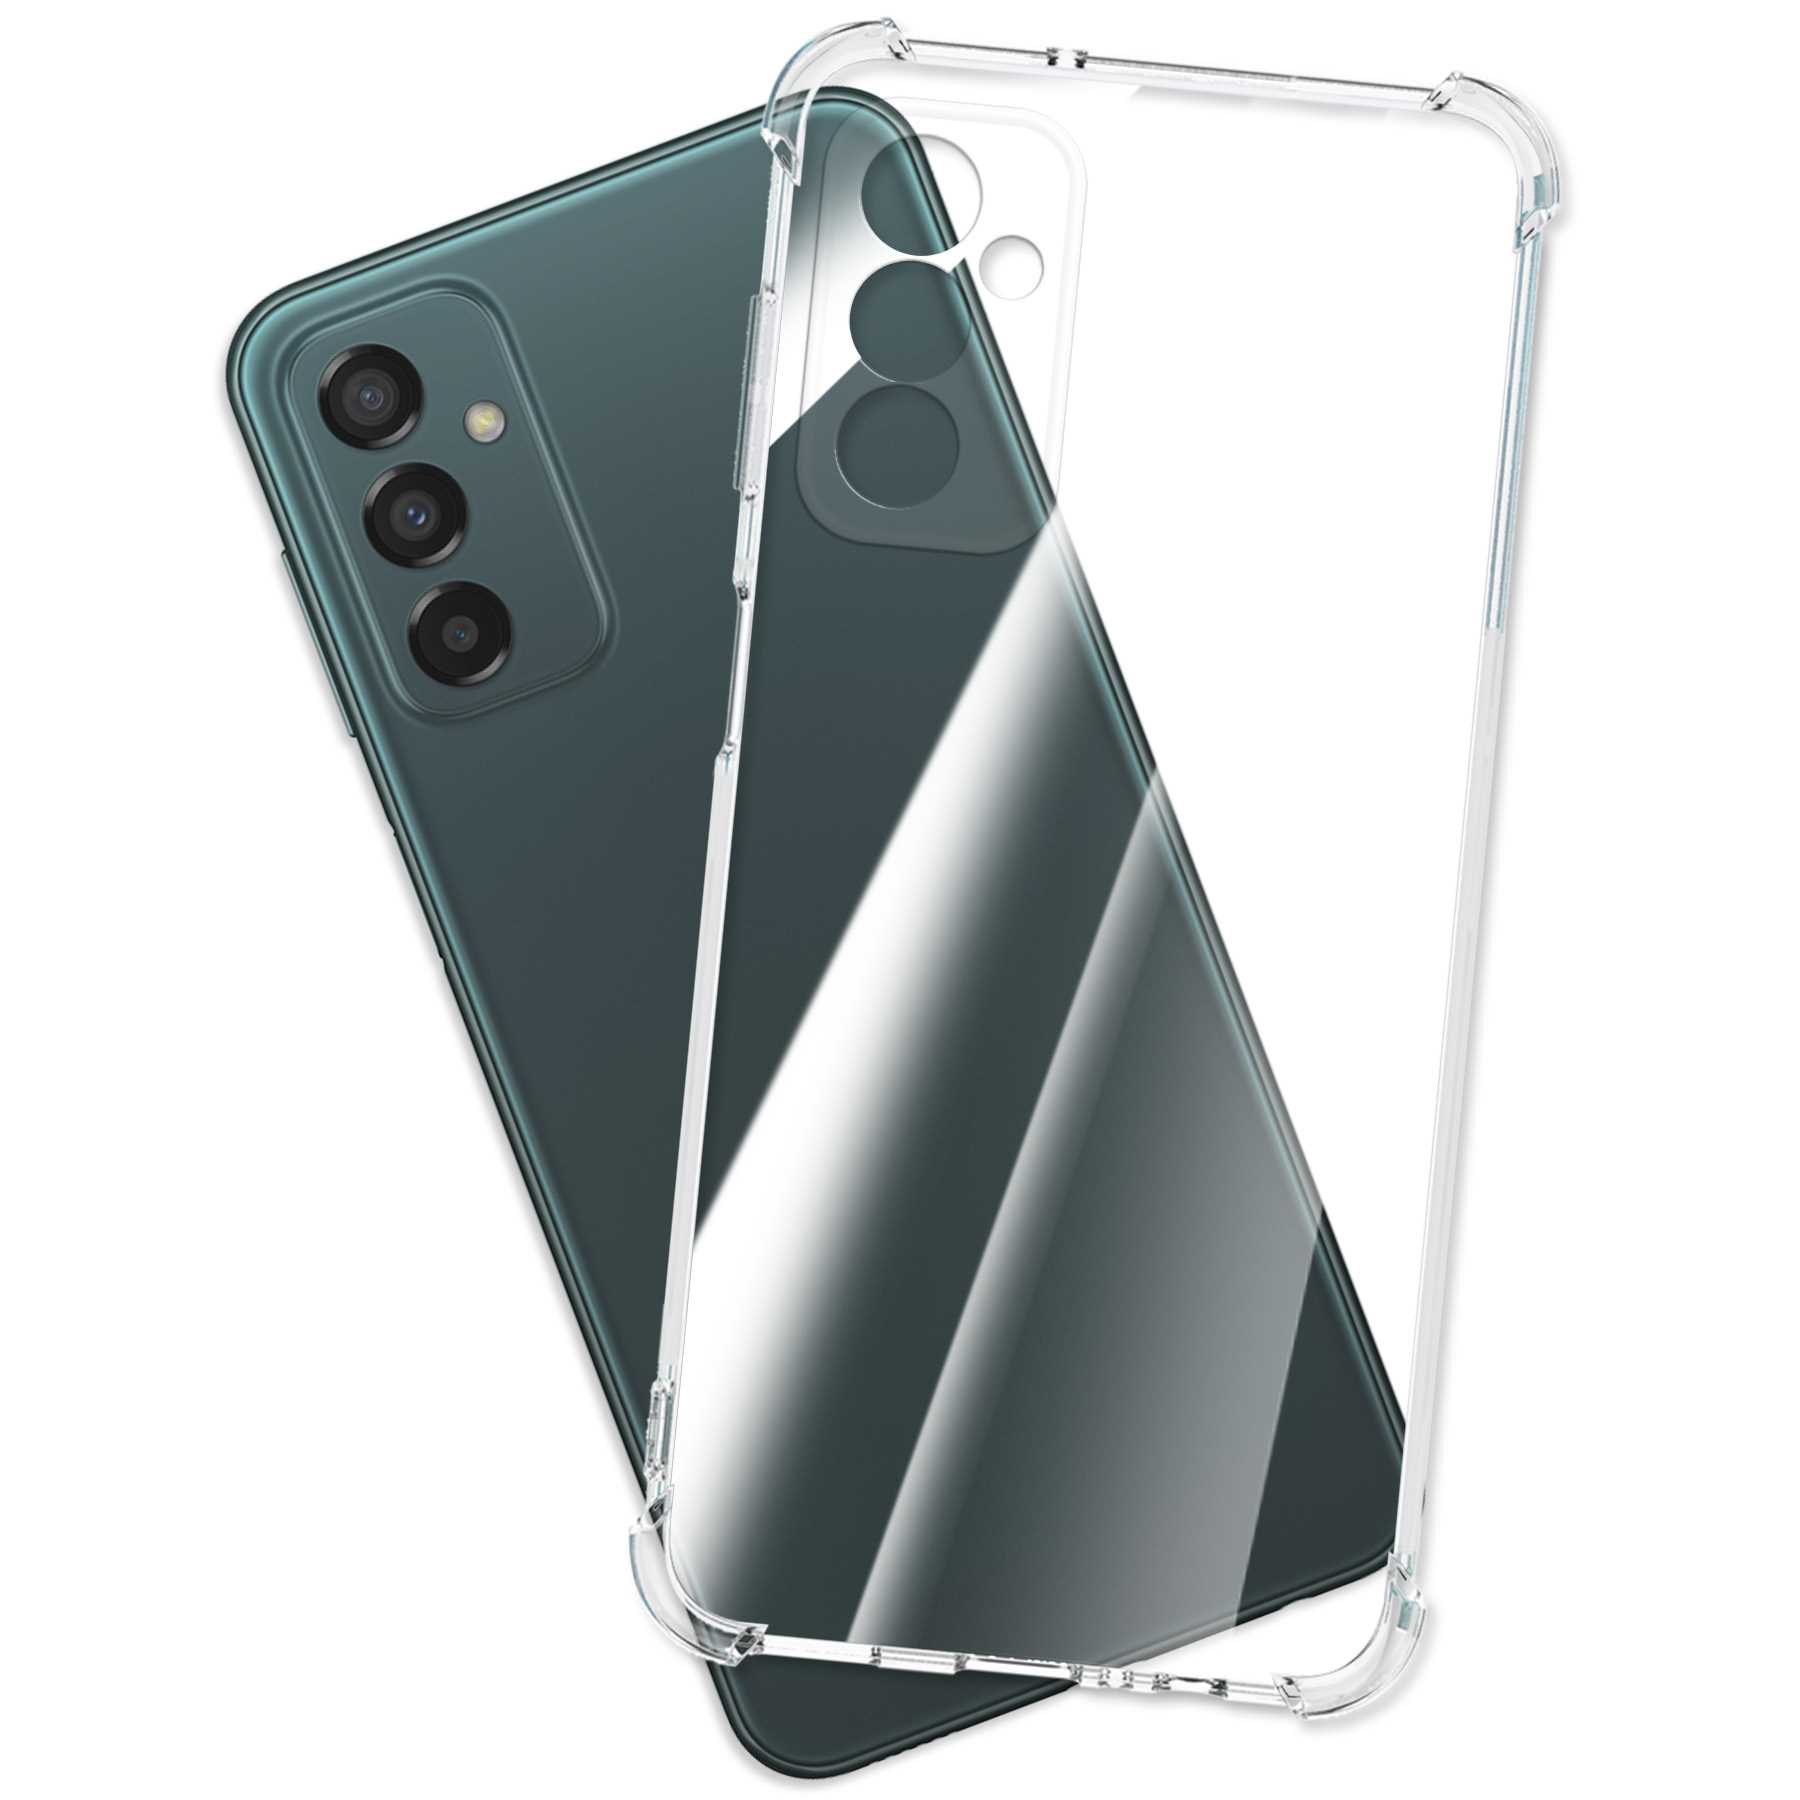 MTB MORE Case, Samsung, Transparent ENERGY 5G, M23 Galaxy Clear Backcover, Armor